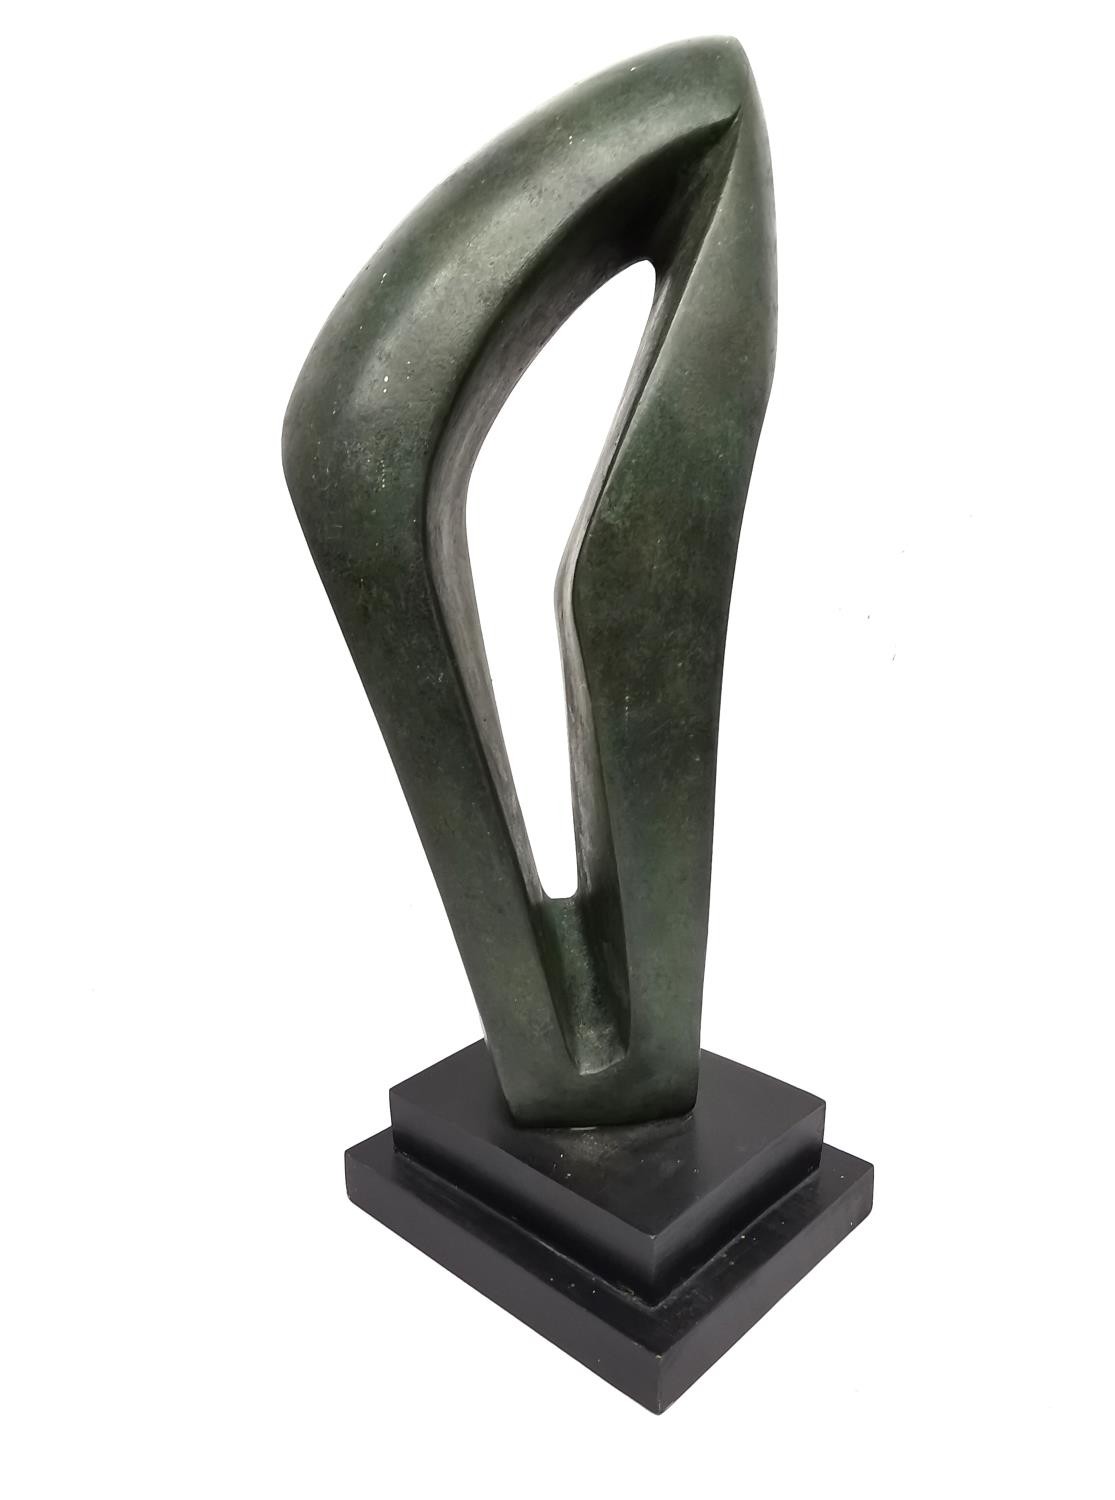 An abstract bronze effect resin sculpture on stepped base. H.41 W.16 D.14cm. - Image 5 of 6